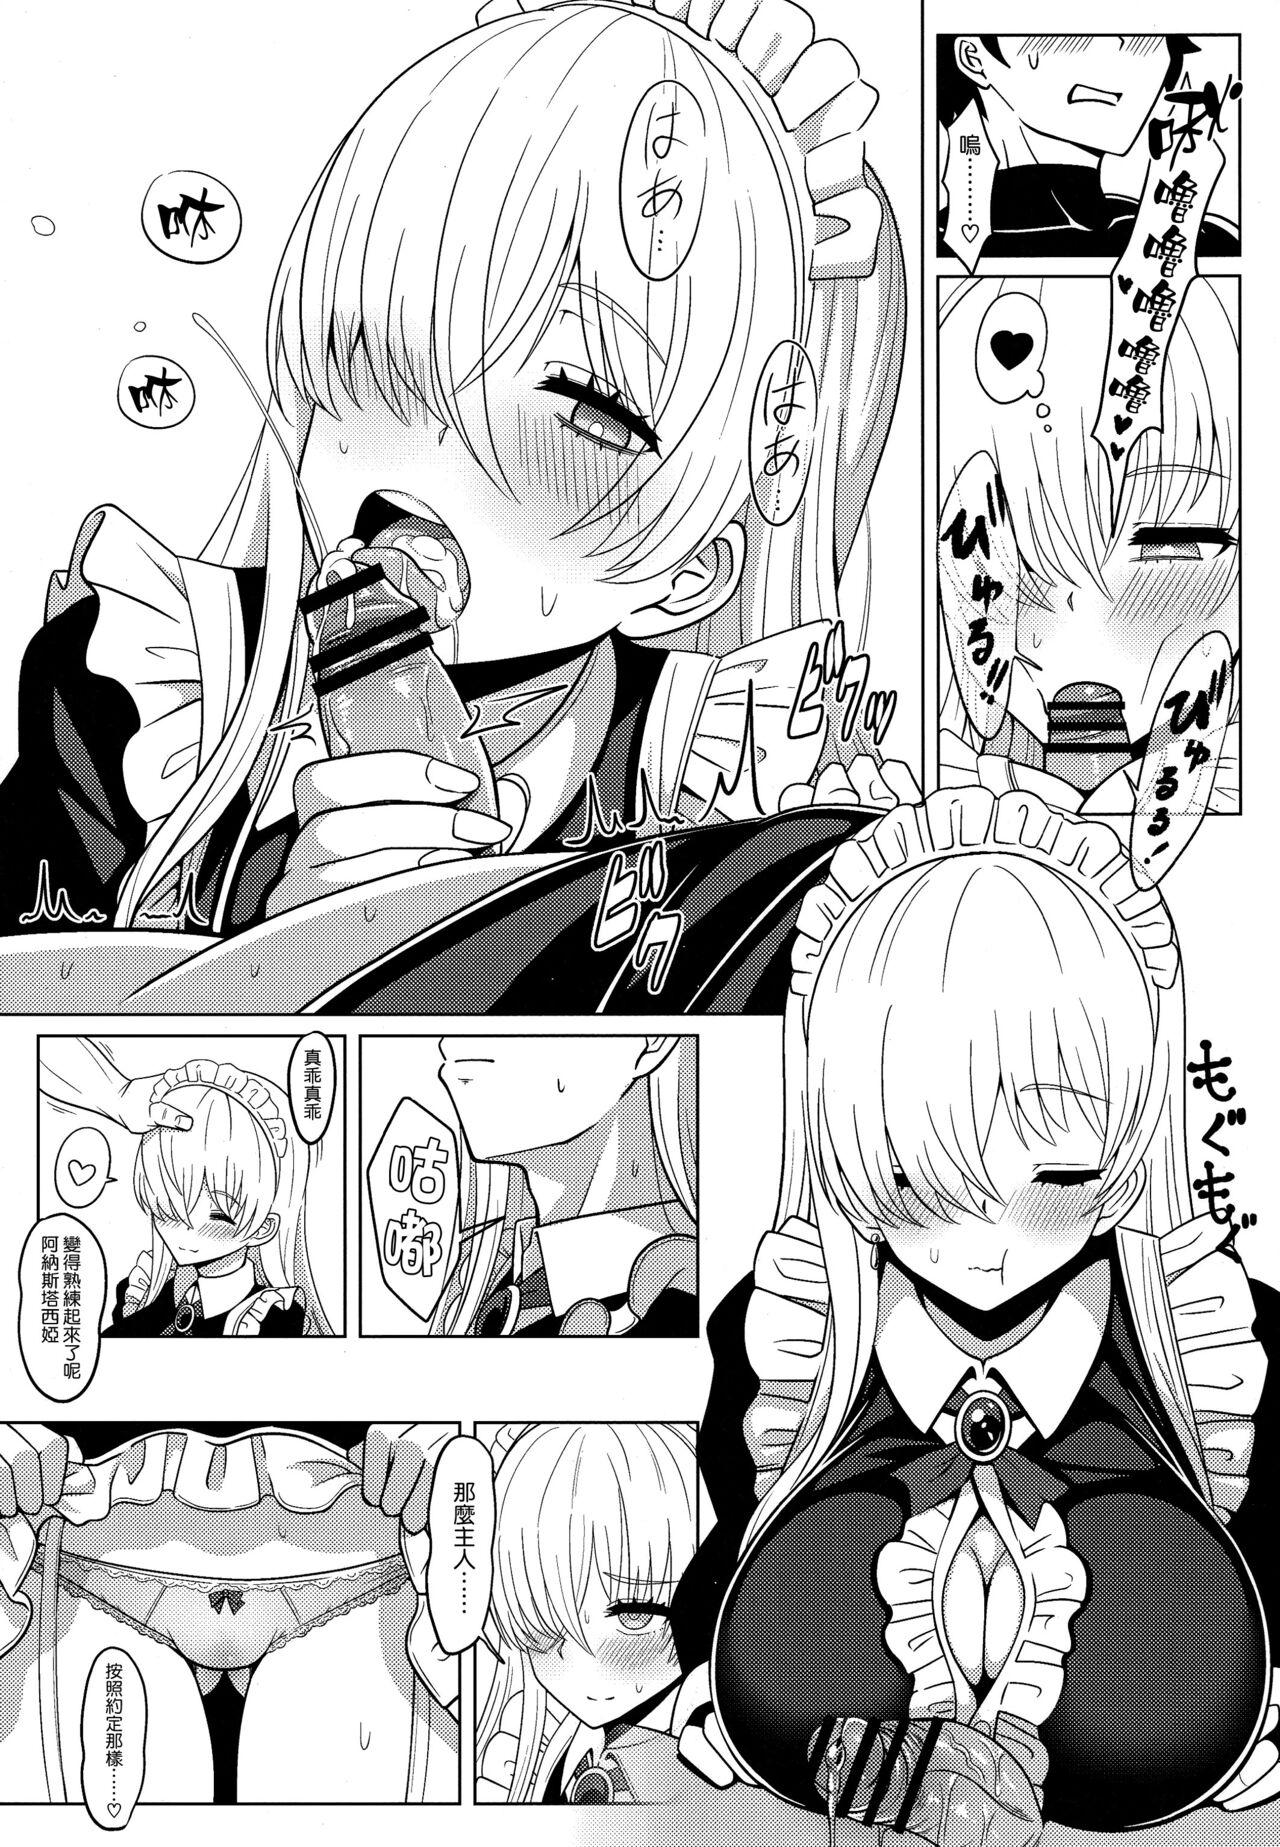 Classy 皇女様と卵 - Fate grand order Gaygroupsex - Page 9